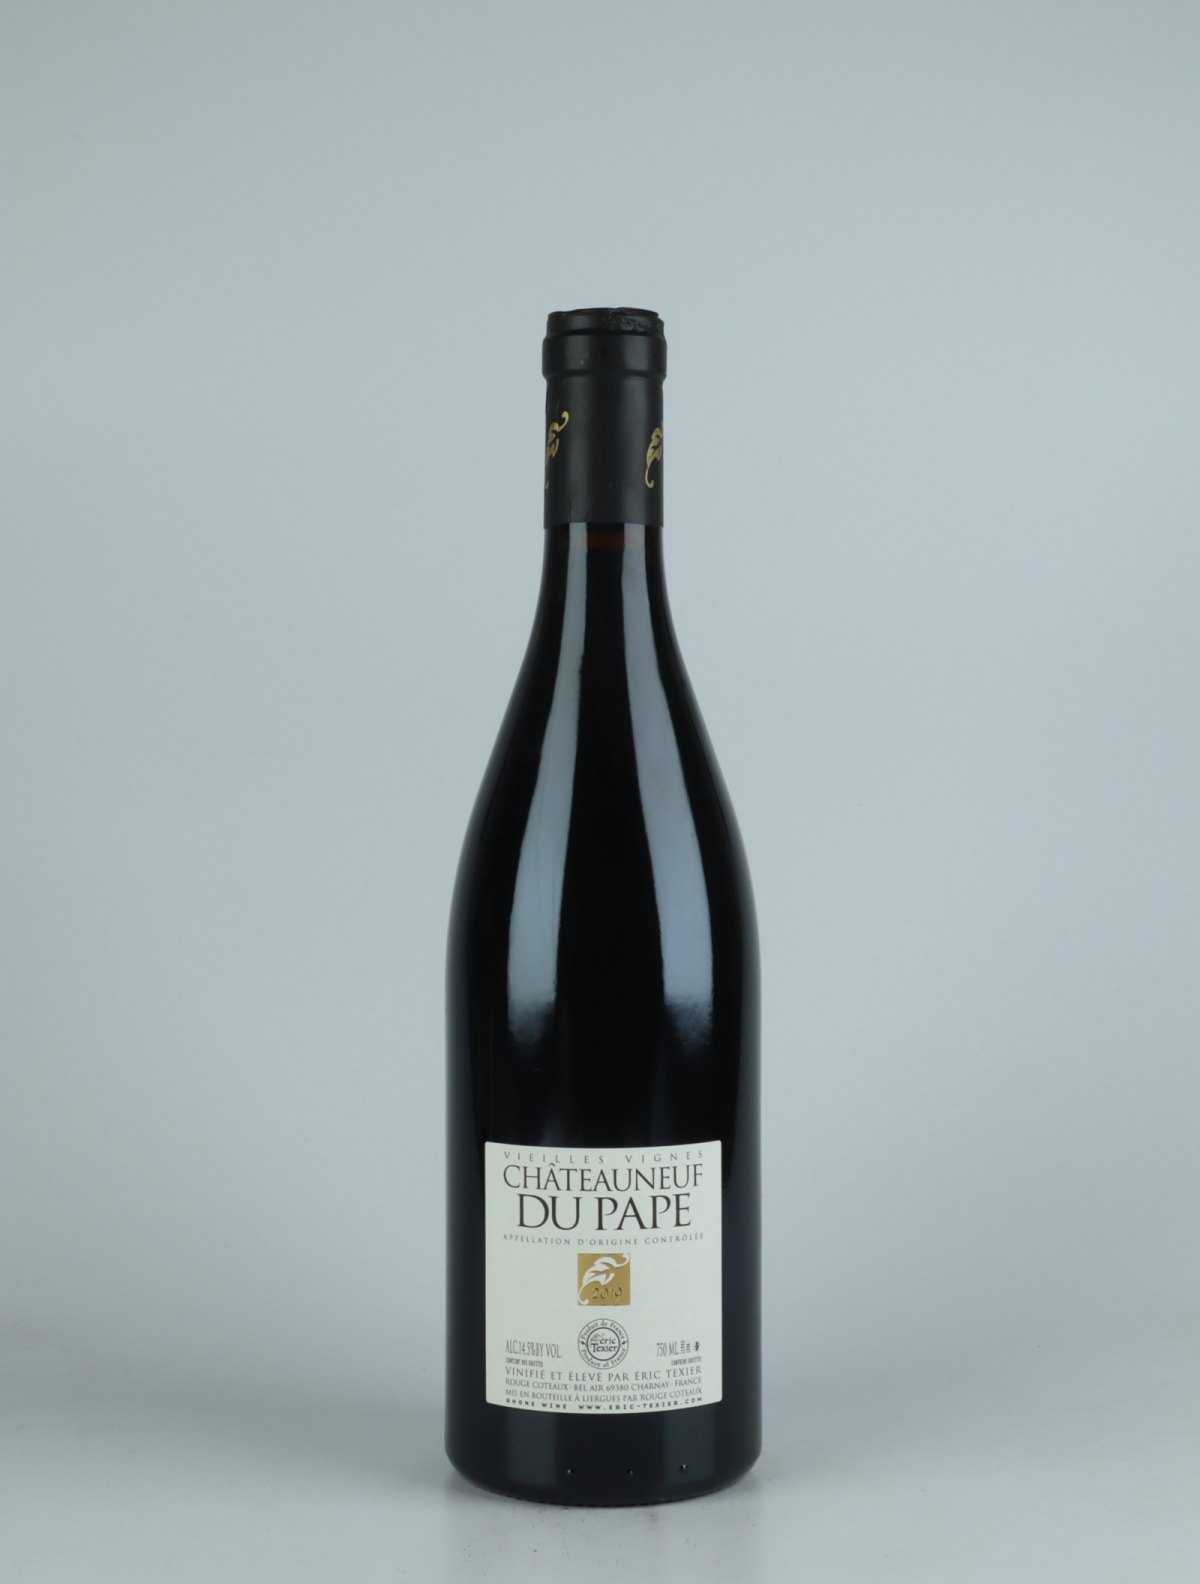 A bottle 2019 Châteauneuf-du-pape V.V. Red wine from Eric Texier, Rhône in France